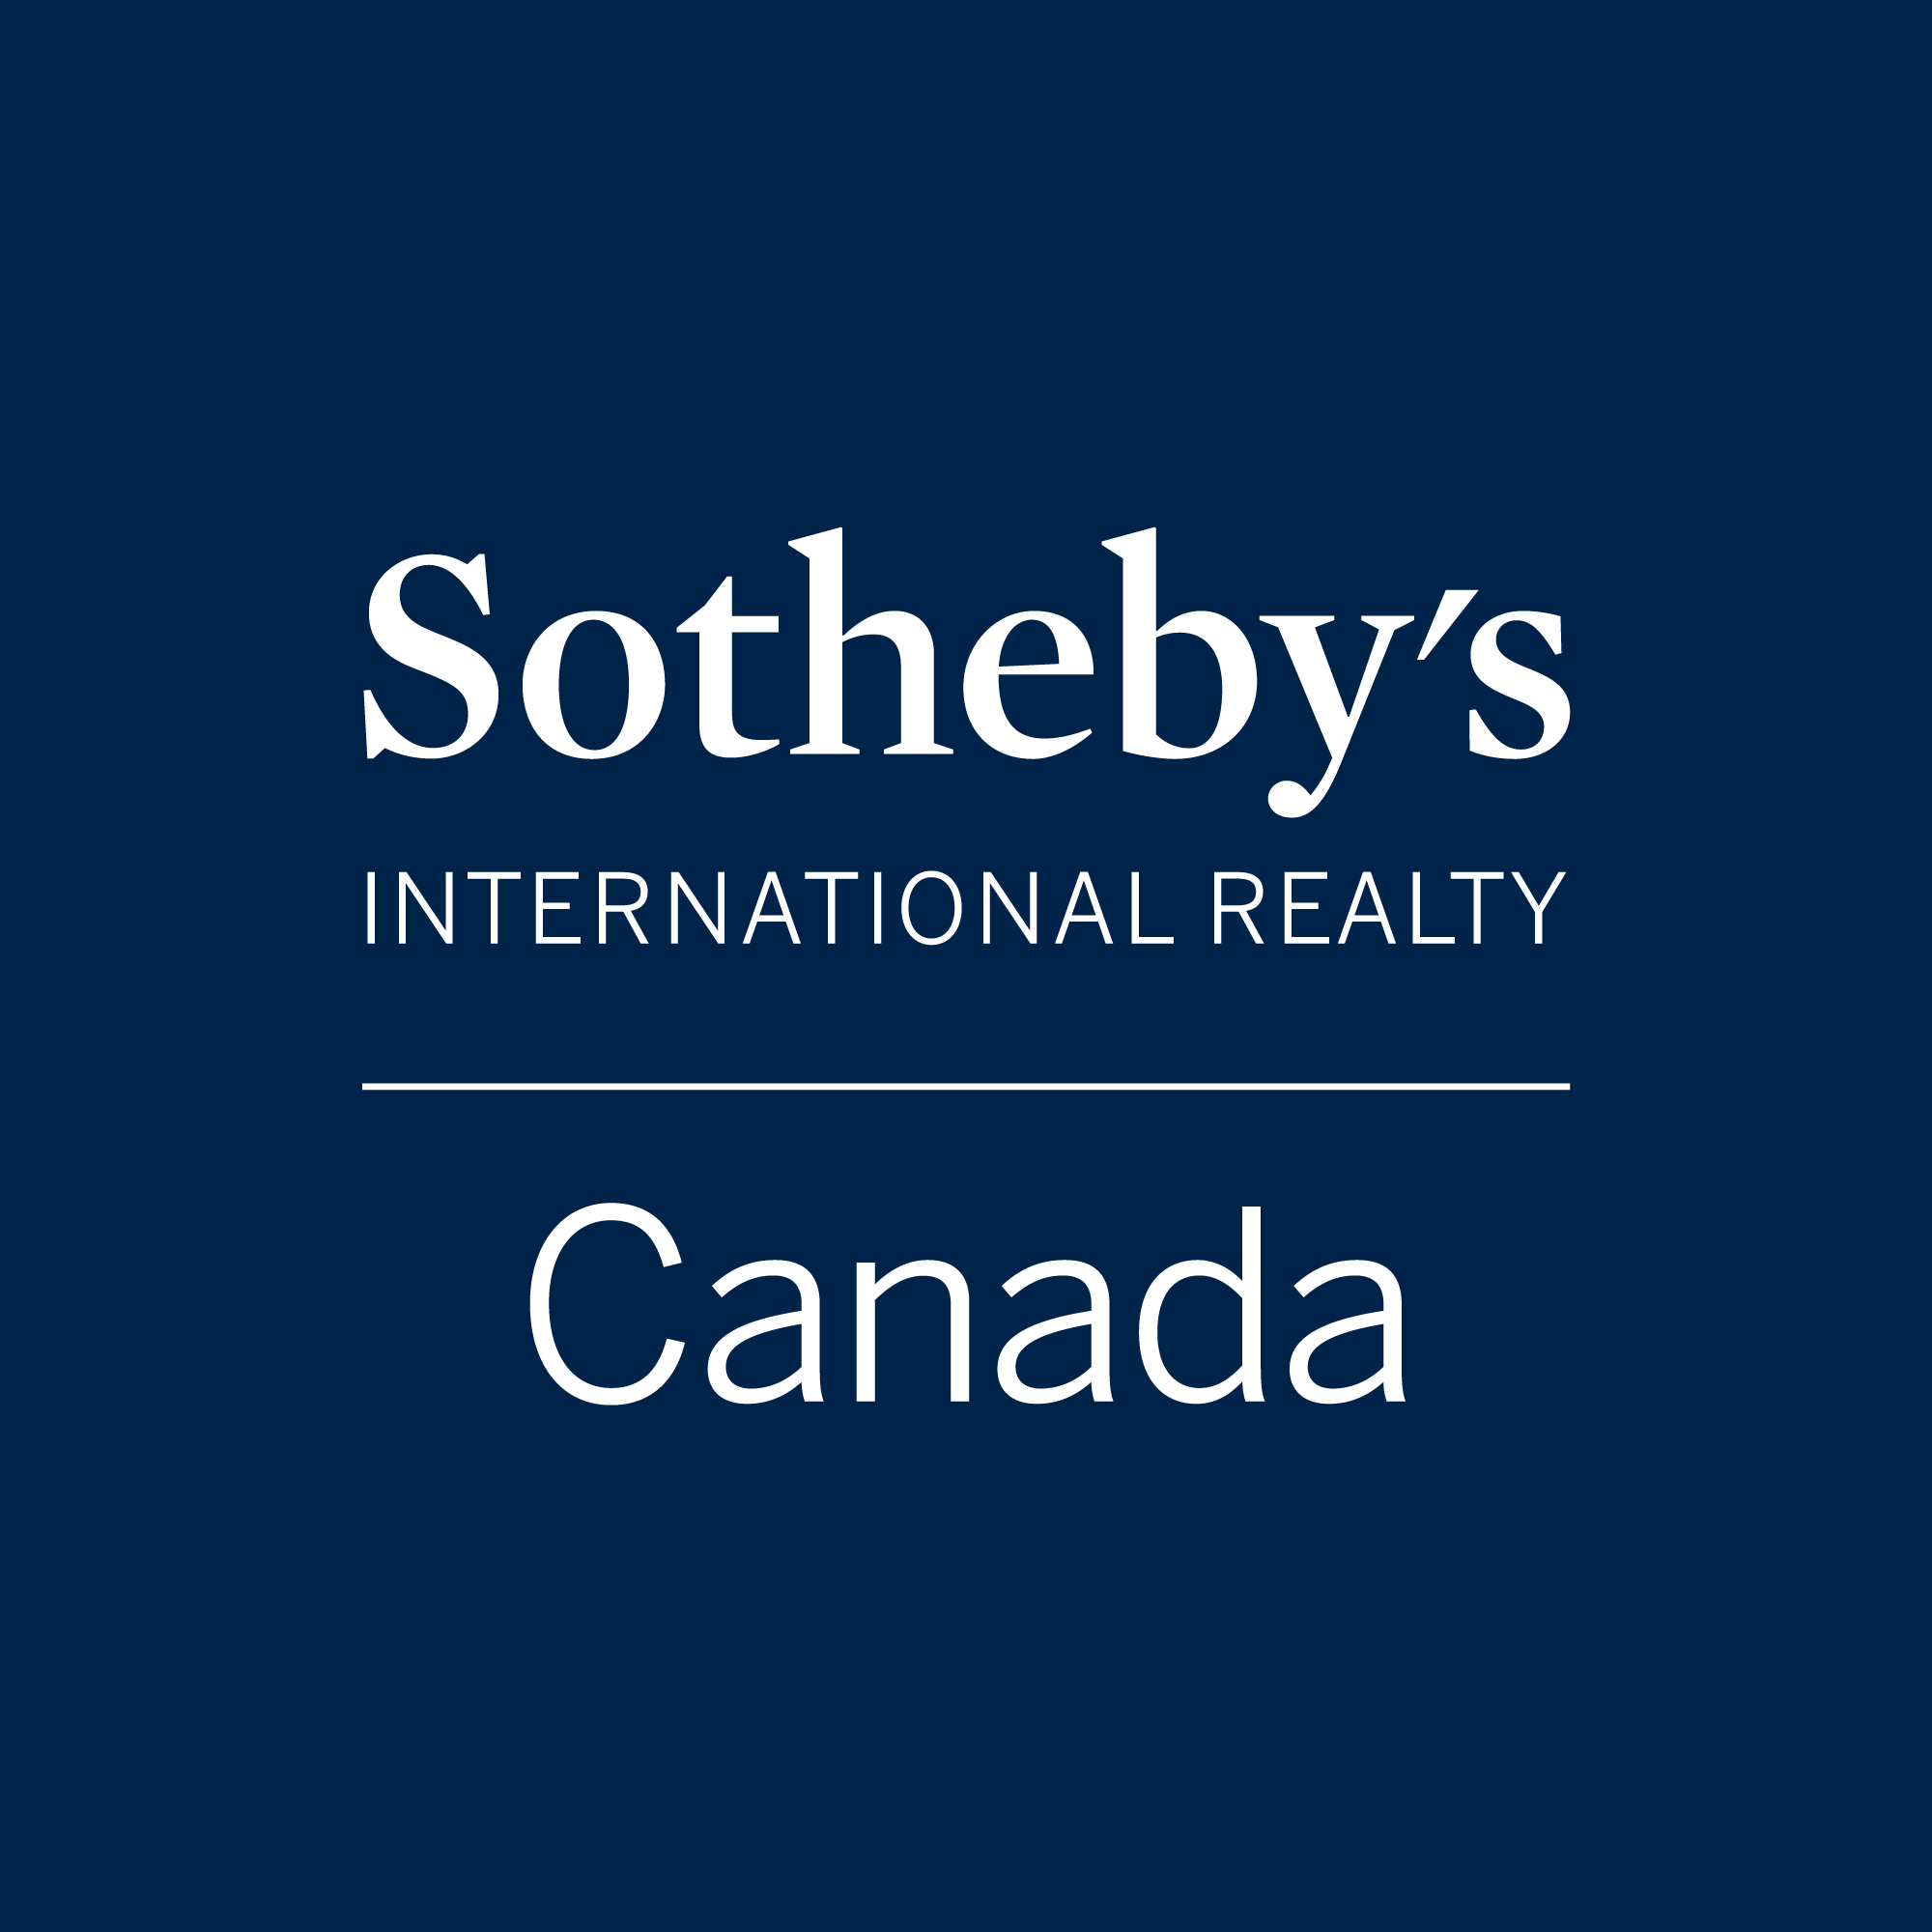 Sotheby's International Realty Quebec - Courtiers immobiliers et agences immobilières